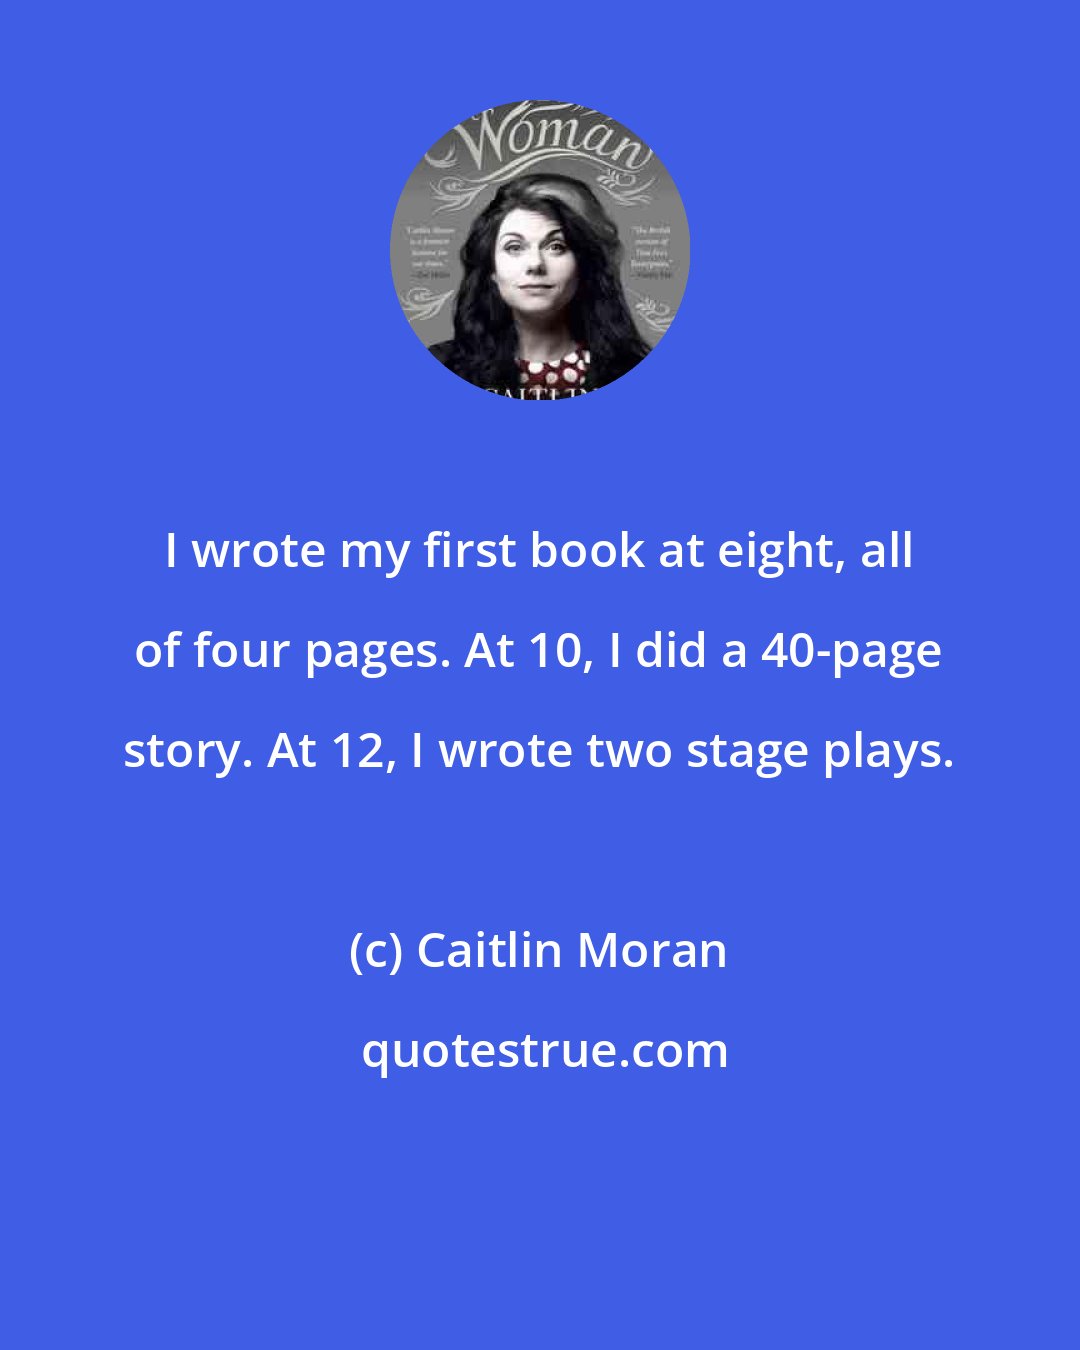 Caitlin Moran: I wrote my first book at eight, all of four pages. At 10, I did a 40-page story. At 12, I wrote two stage plays.